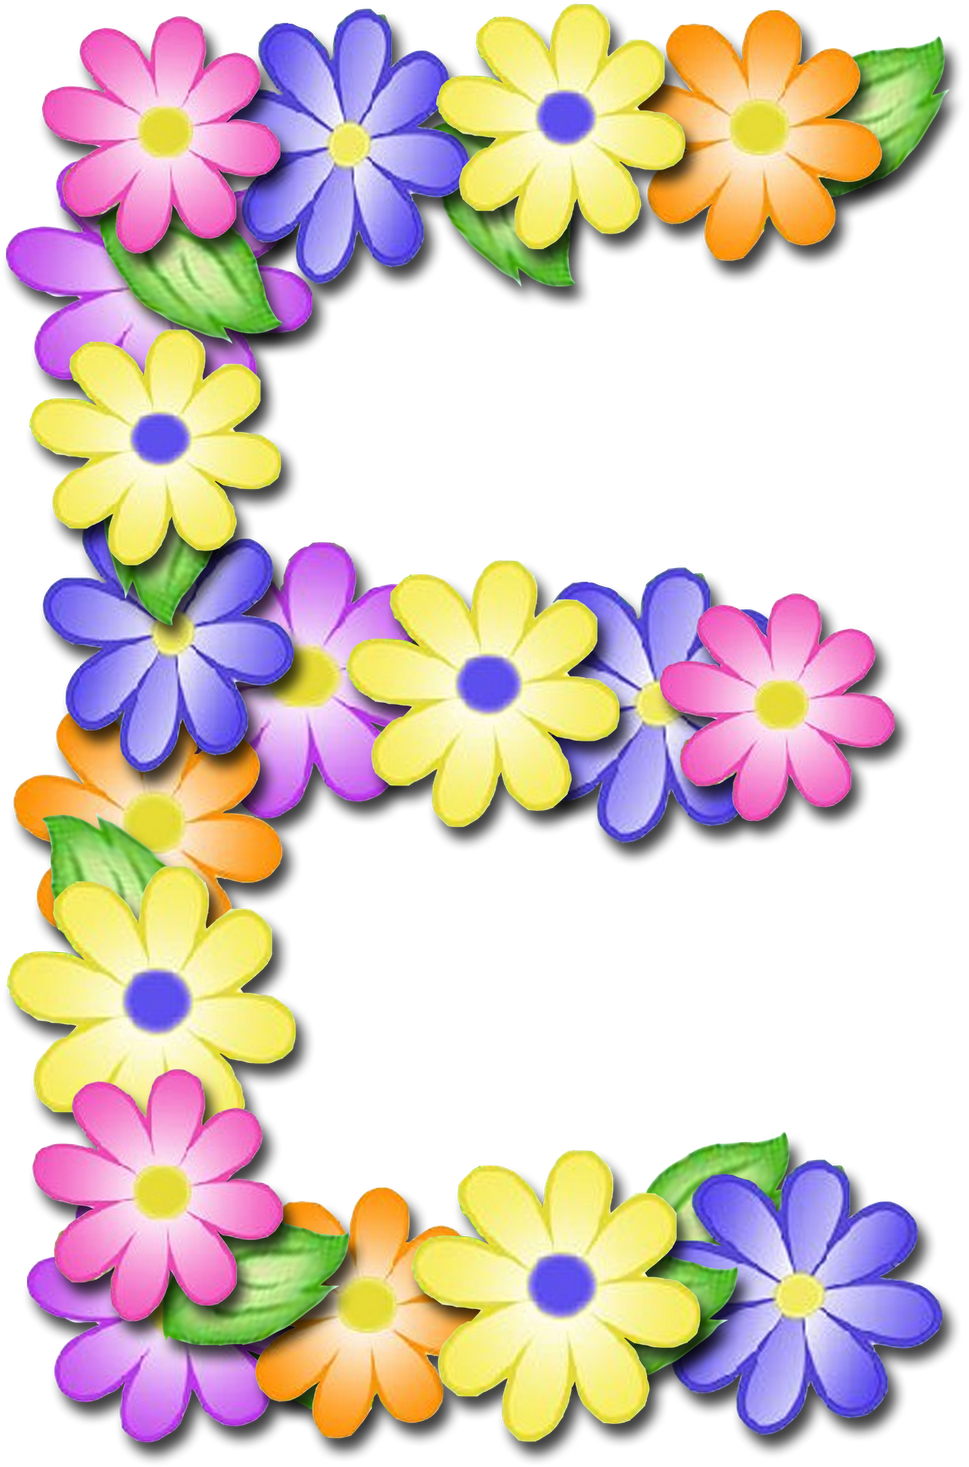 Alphabet Flower PNG Image High Quality PNG Image